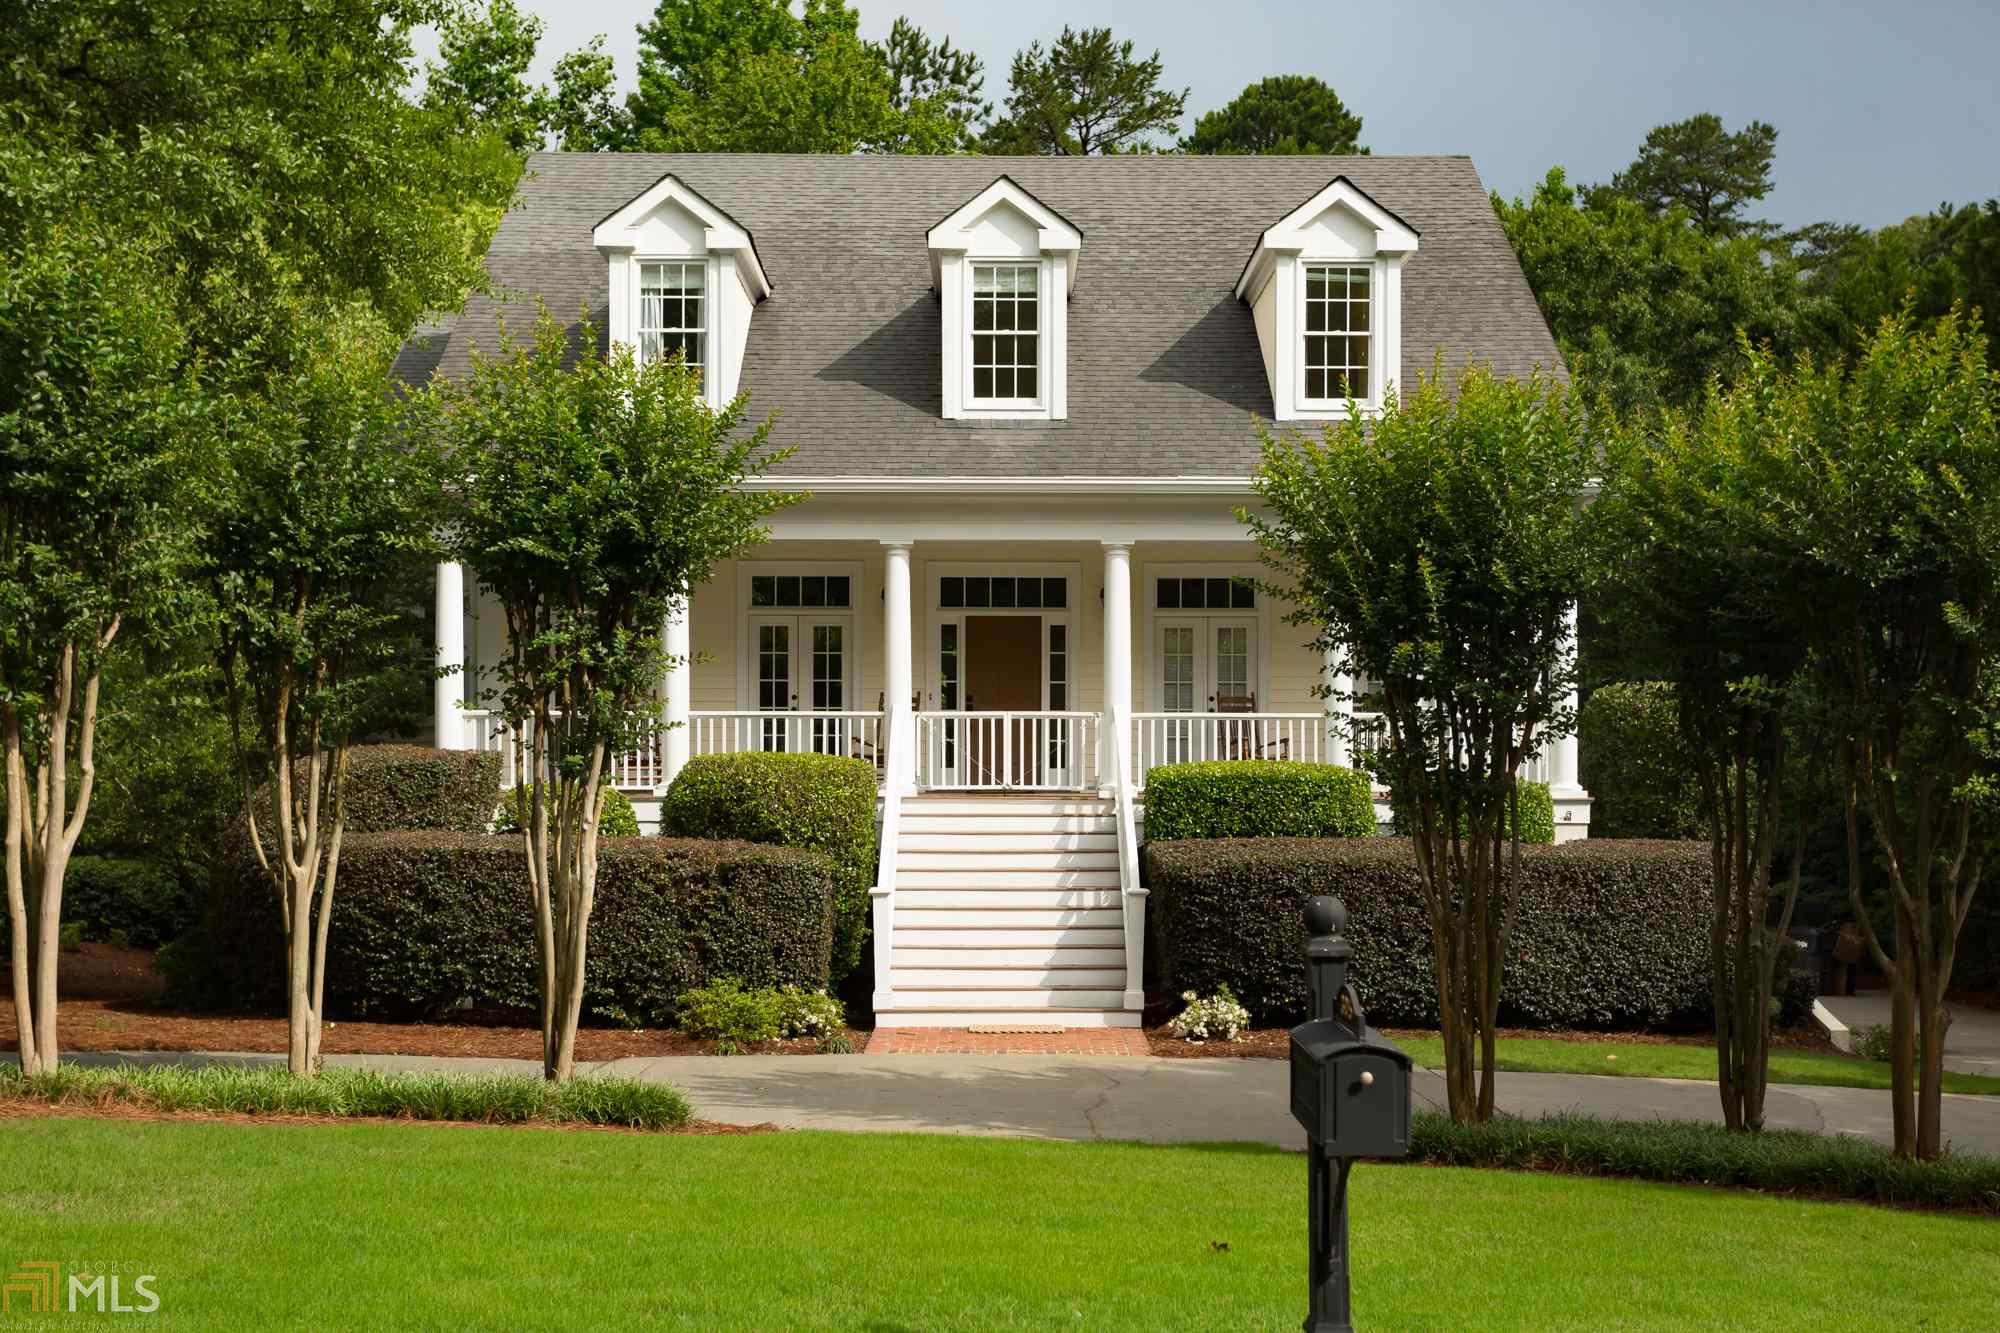 houses for sale in peachtree city ga